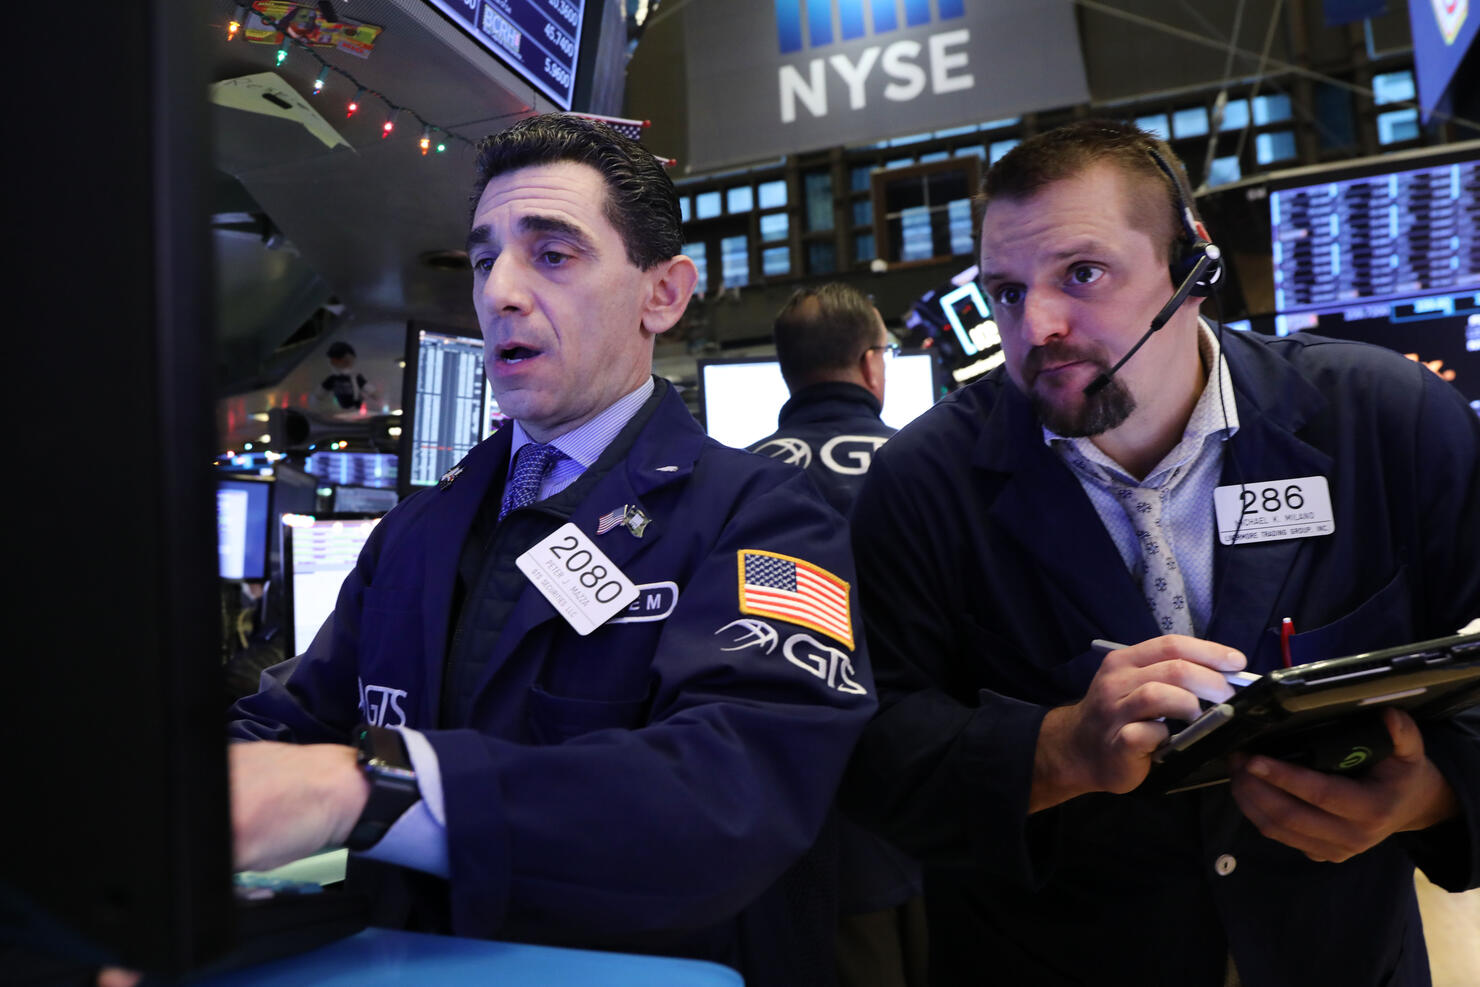 stocks trading sharply lower following historic 1,000 point rally yesterrday